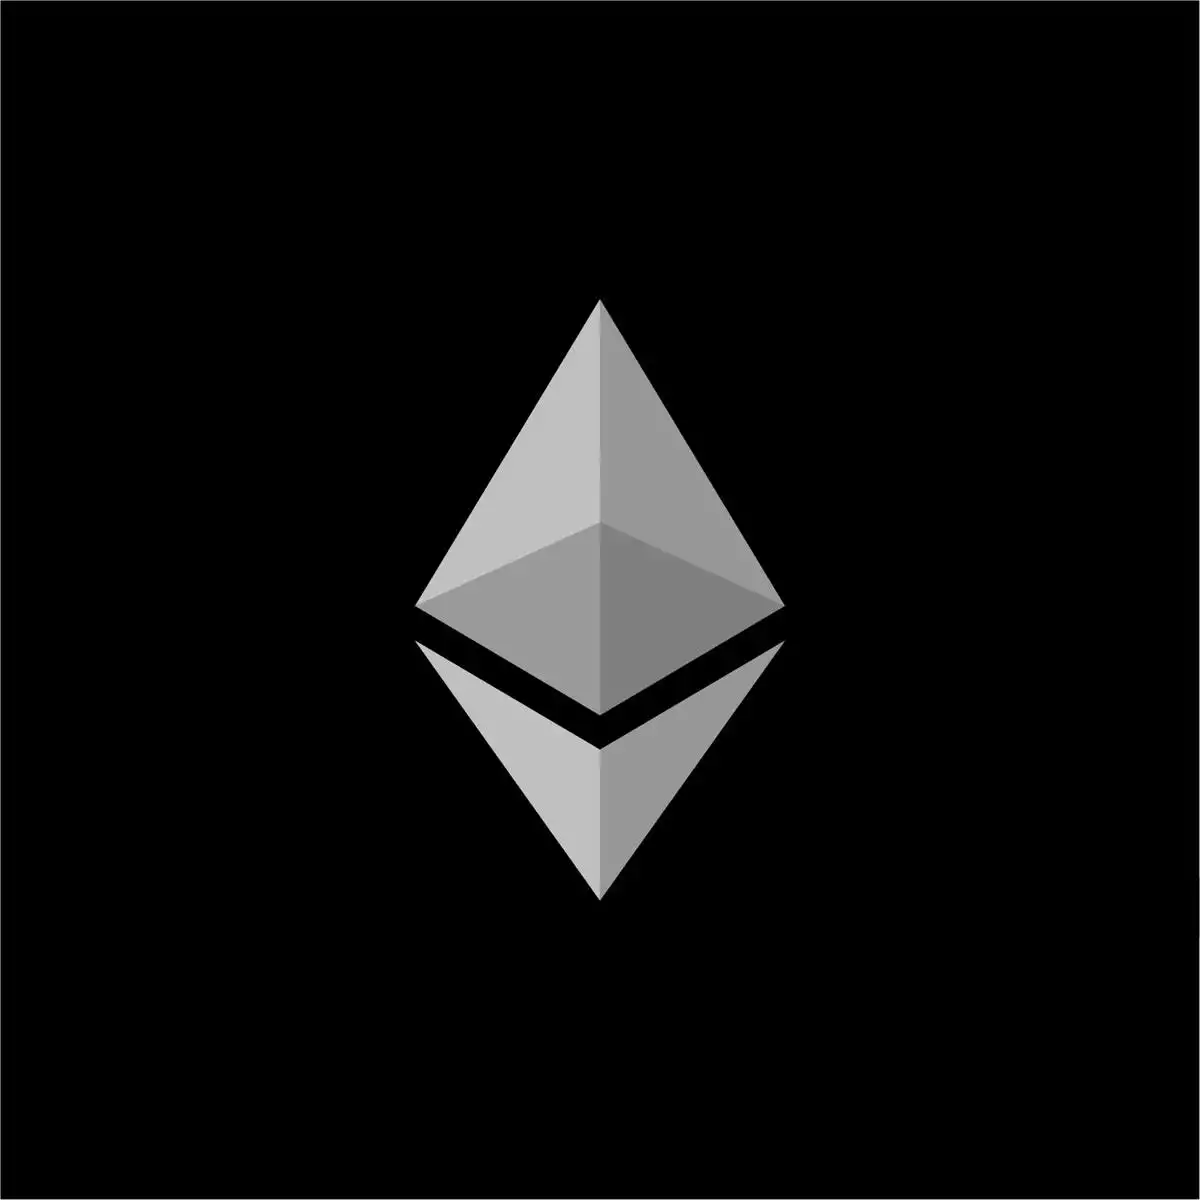 ainslie ethereum (eth) ethereum is the 2nd largest cryptocurrency by market cap. it is an open-source, distributed computing platform and operating sy...